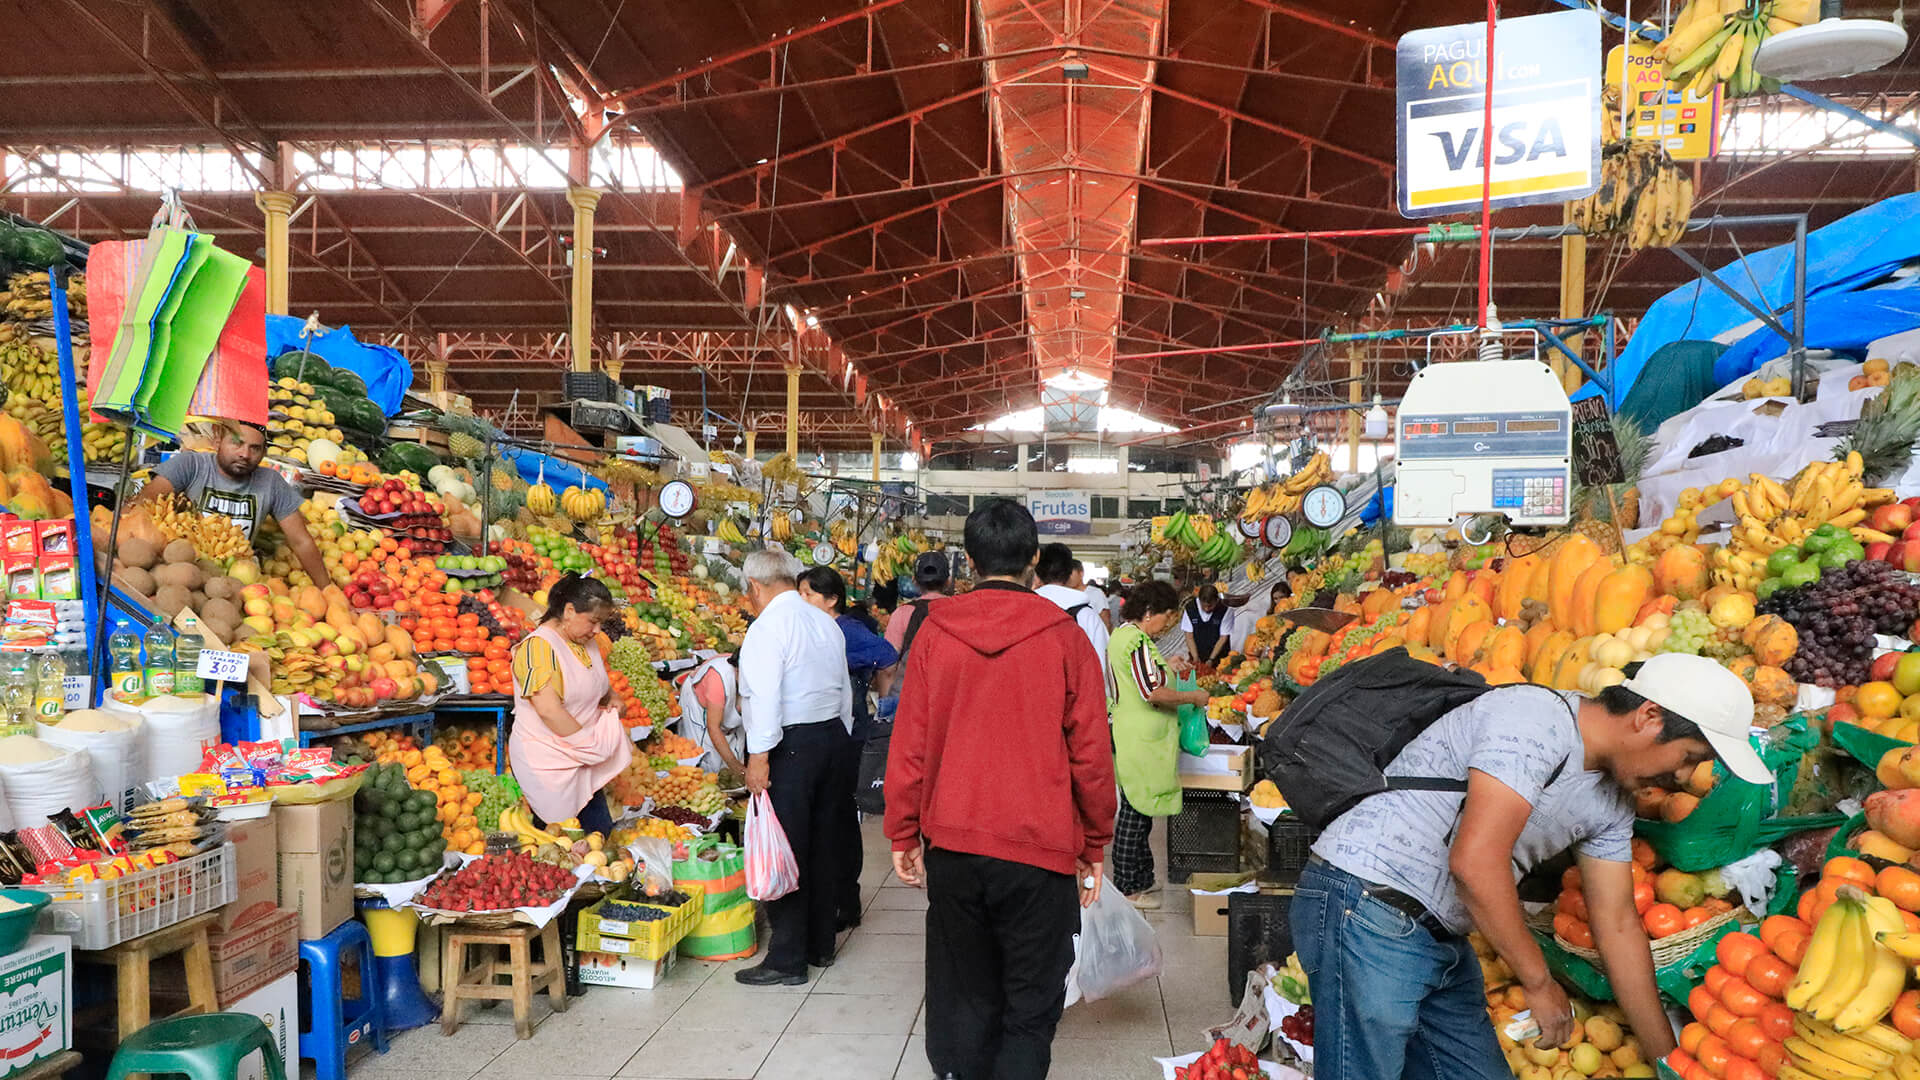 The overflowing fruit stands of the San Camilo market in Arequipa - RESPONSible Travel Peru